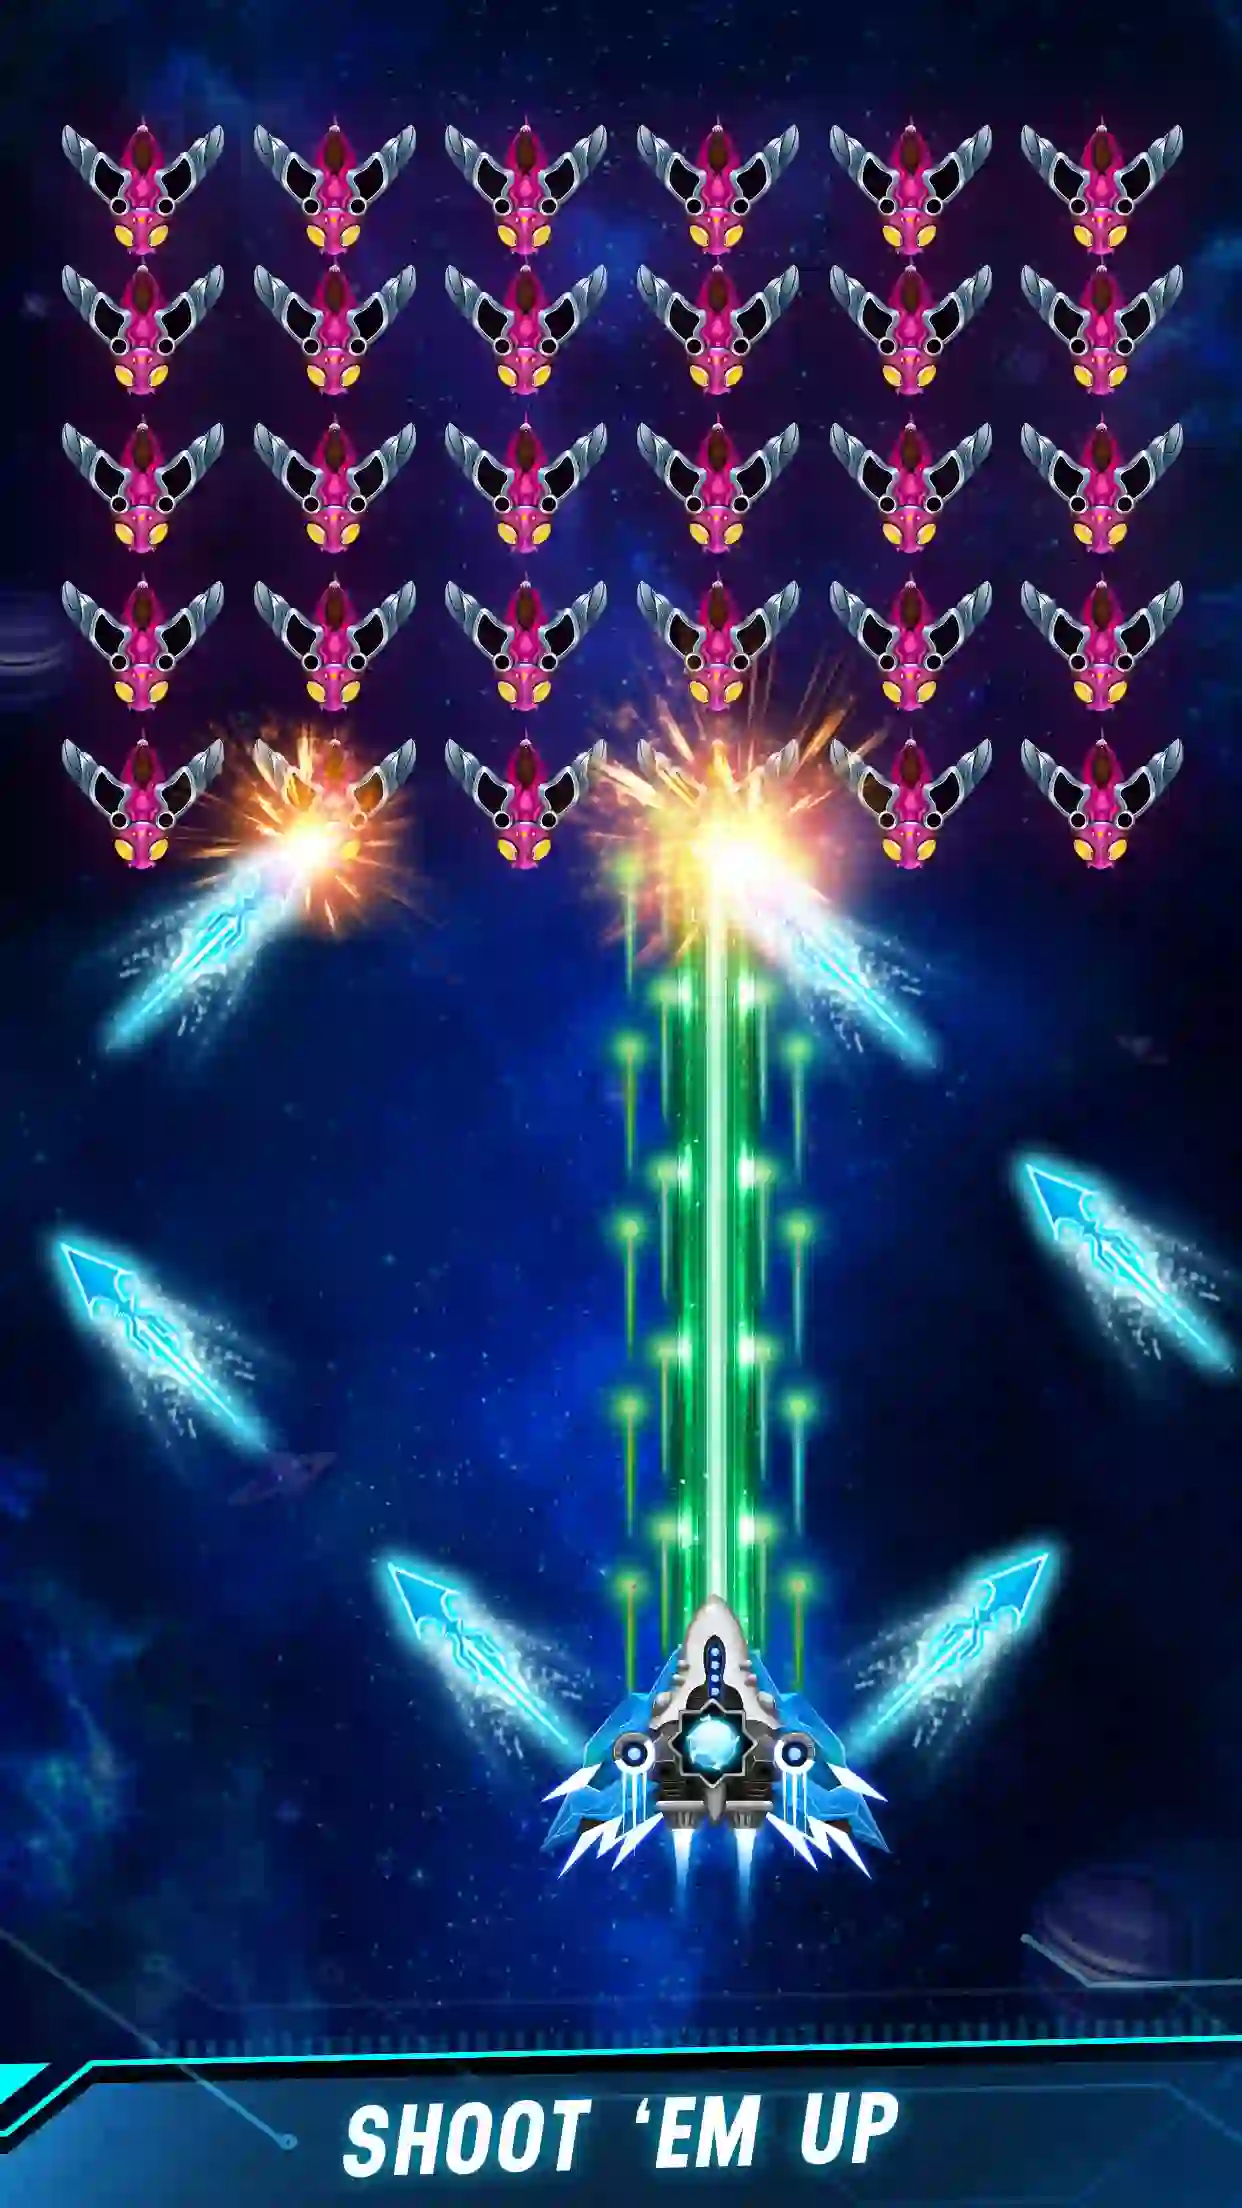 Space shooter - Galaxy attack
